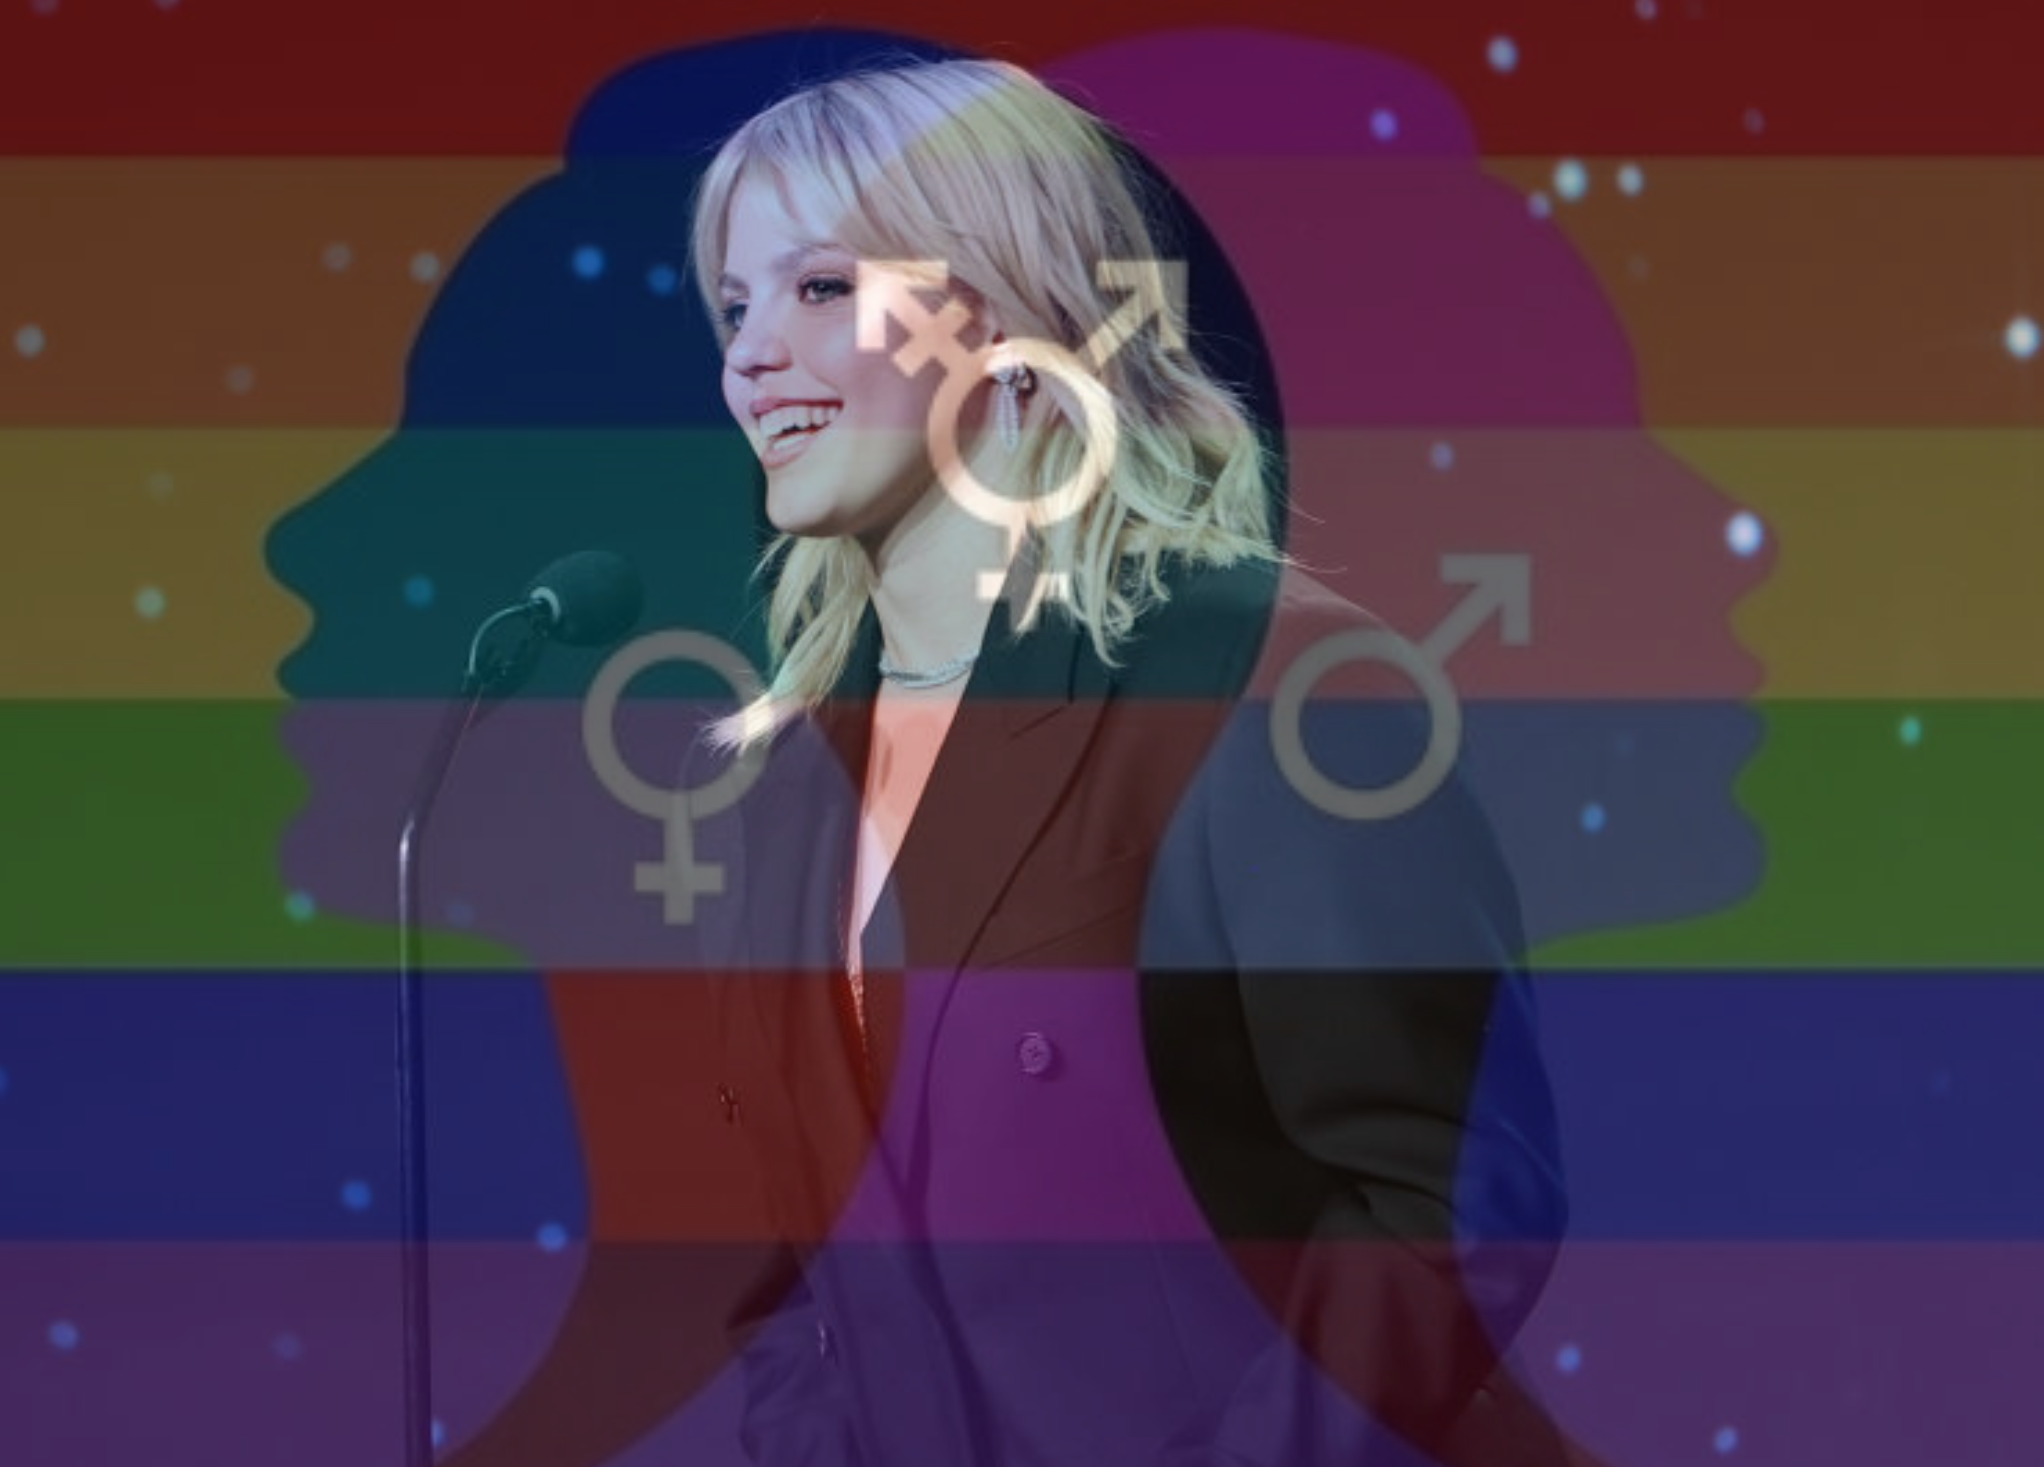 Reneé at a podium with a microphone overlaid with gender symbols and a rainbow flag